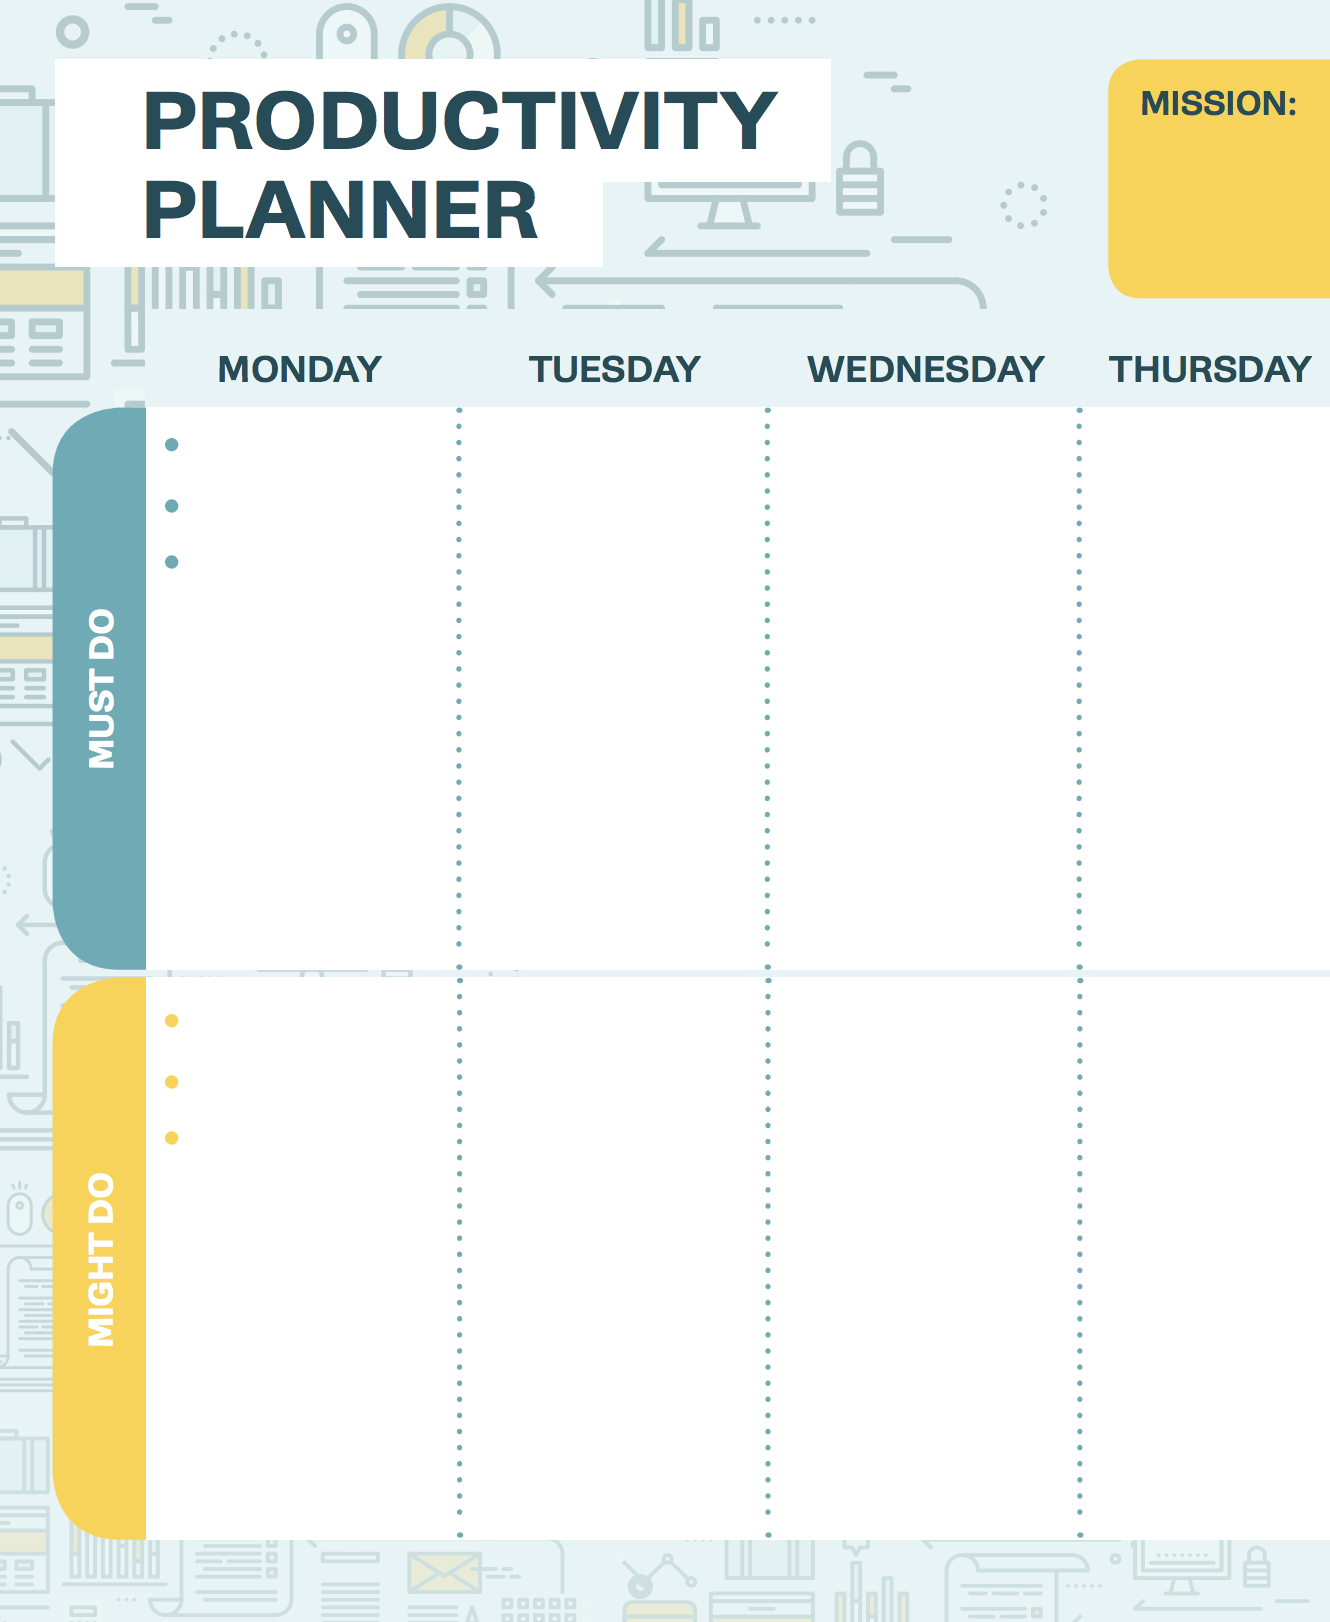 Weekly Productivity Planner » Resources